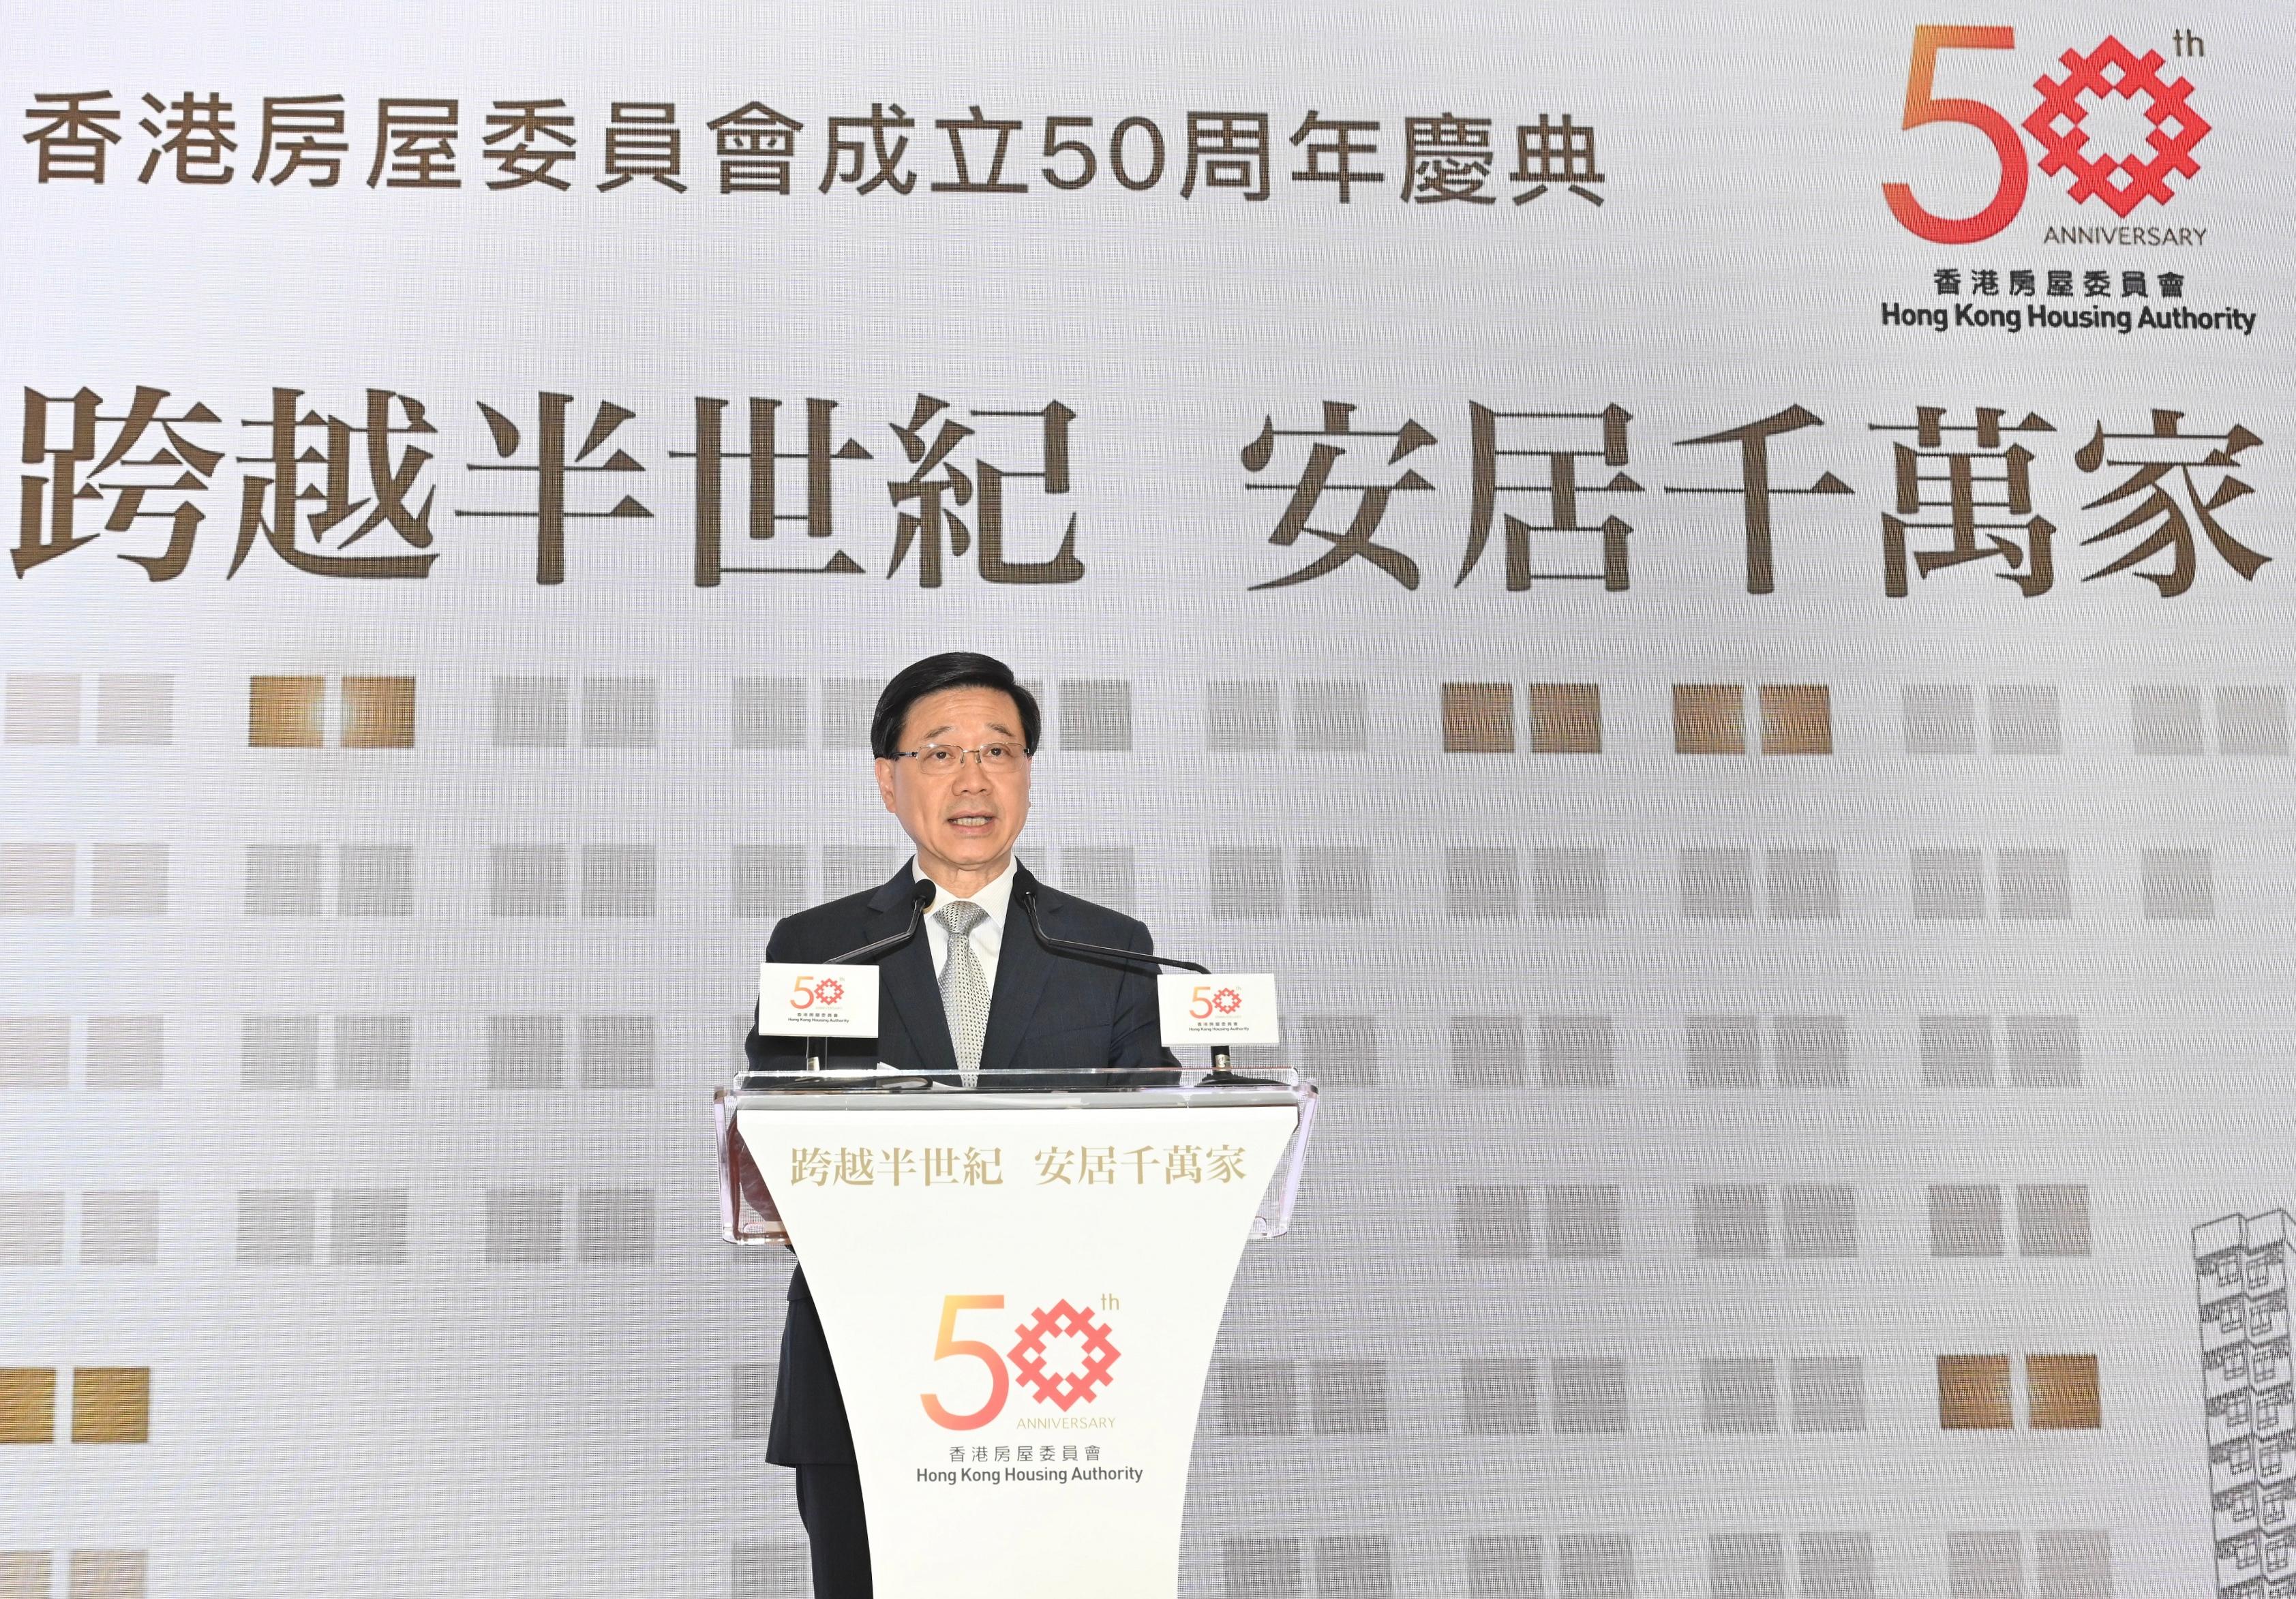 The Chief Executive, Mr John Lee, speaks at the Hong Kong Housing Authority 50th anniversary celebration ceremony today (December 12).